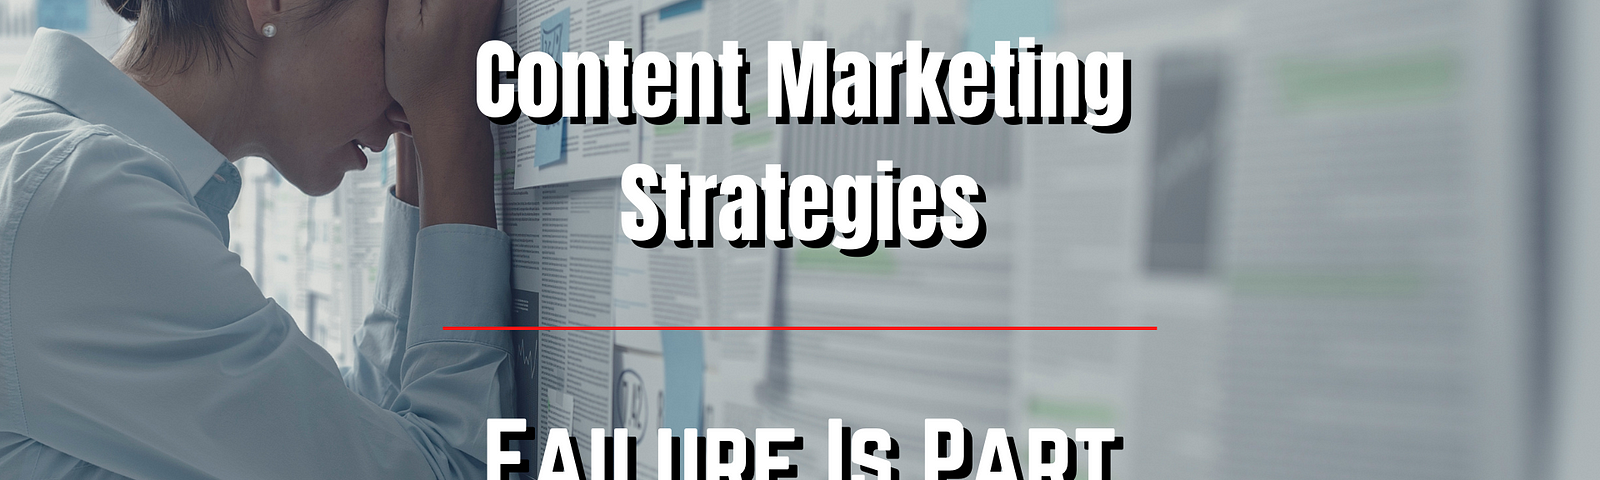 failure with content marketing strategies on medium is part of the process